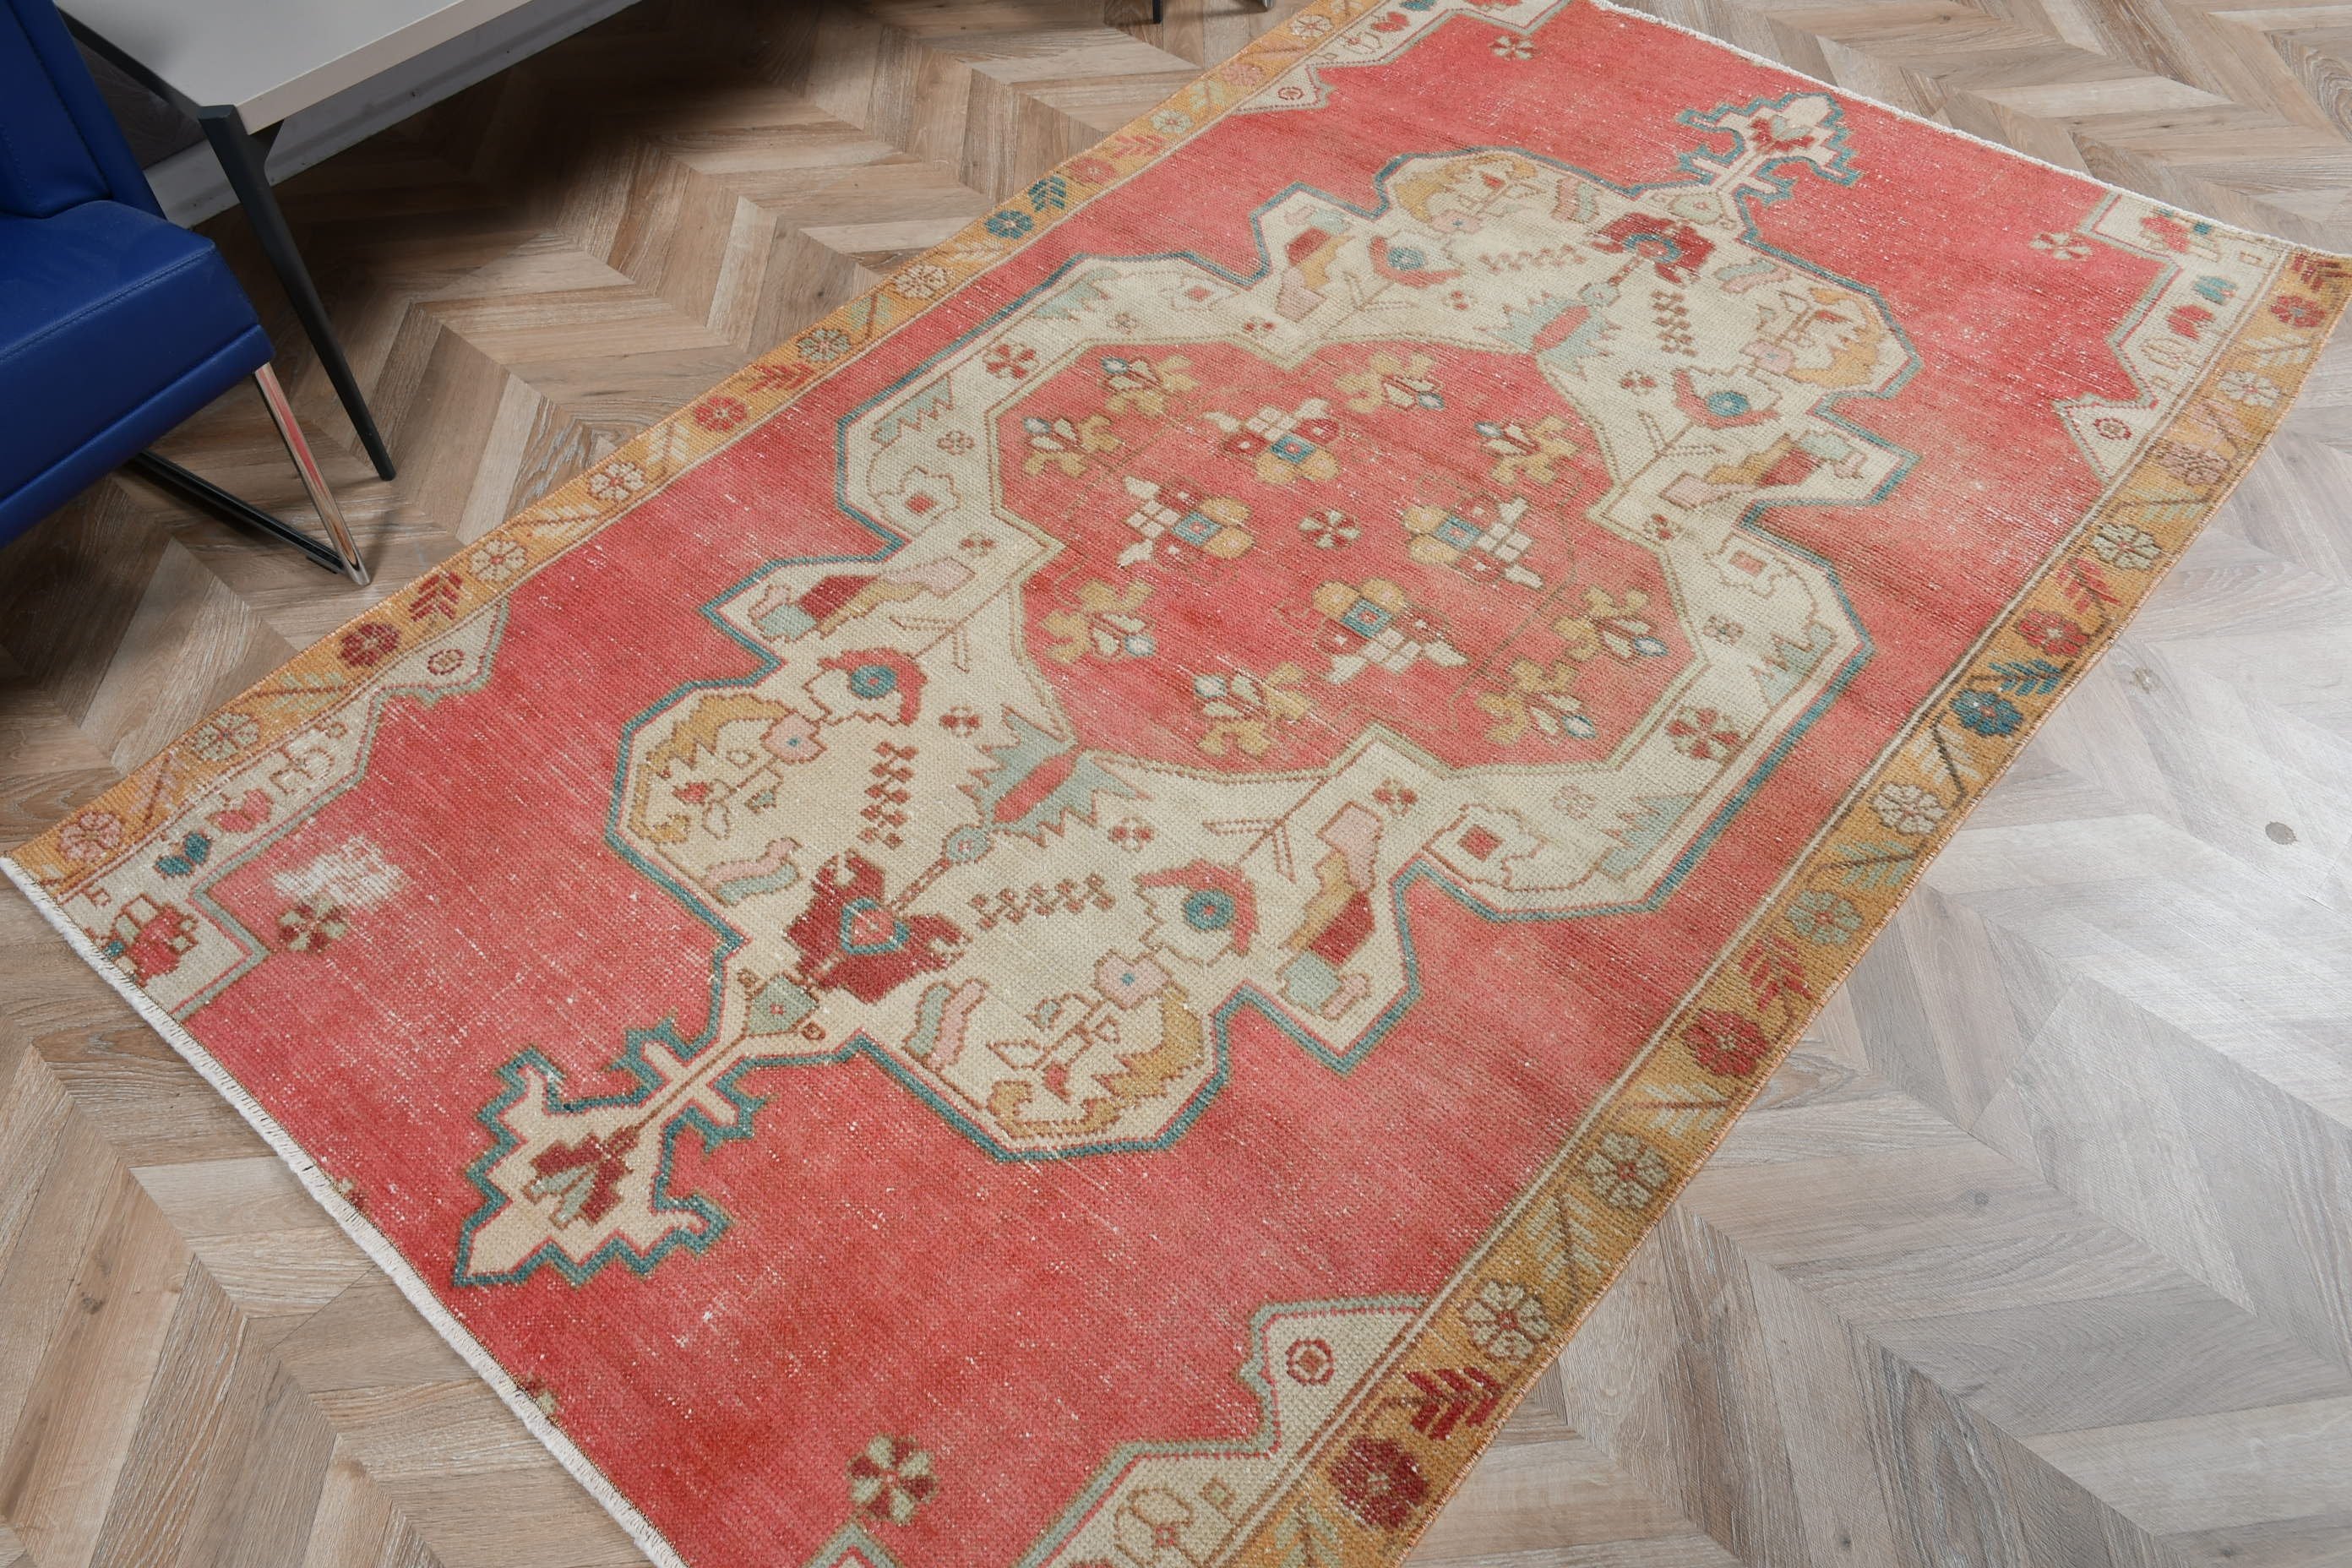 Nursery Rug, Antique Rug, Turkish Rugs, Rugs for Dining Room, Abstract Rug, Wool Rug, 4.3x6.9 ft Area Rug, Red Kitchen Rugs, Vintage Rugs